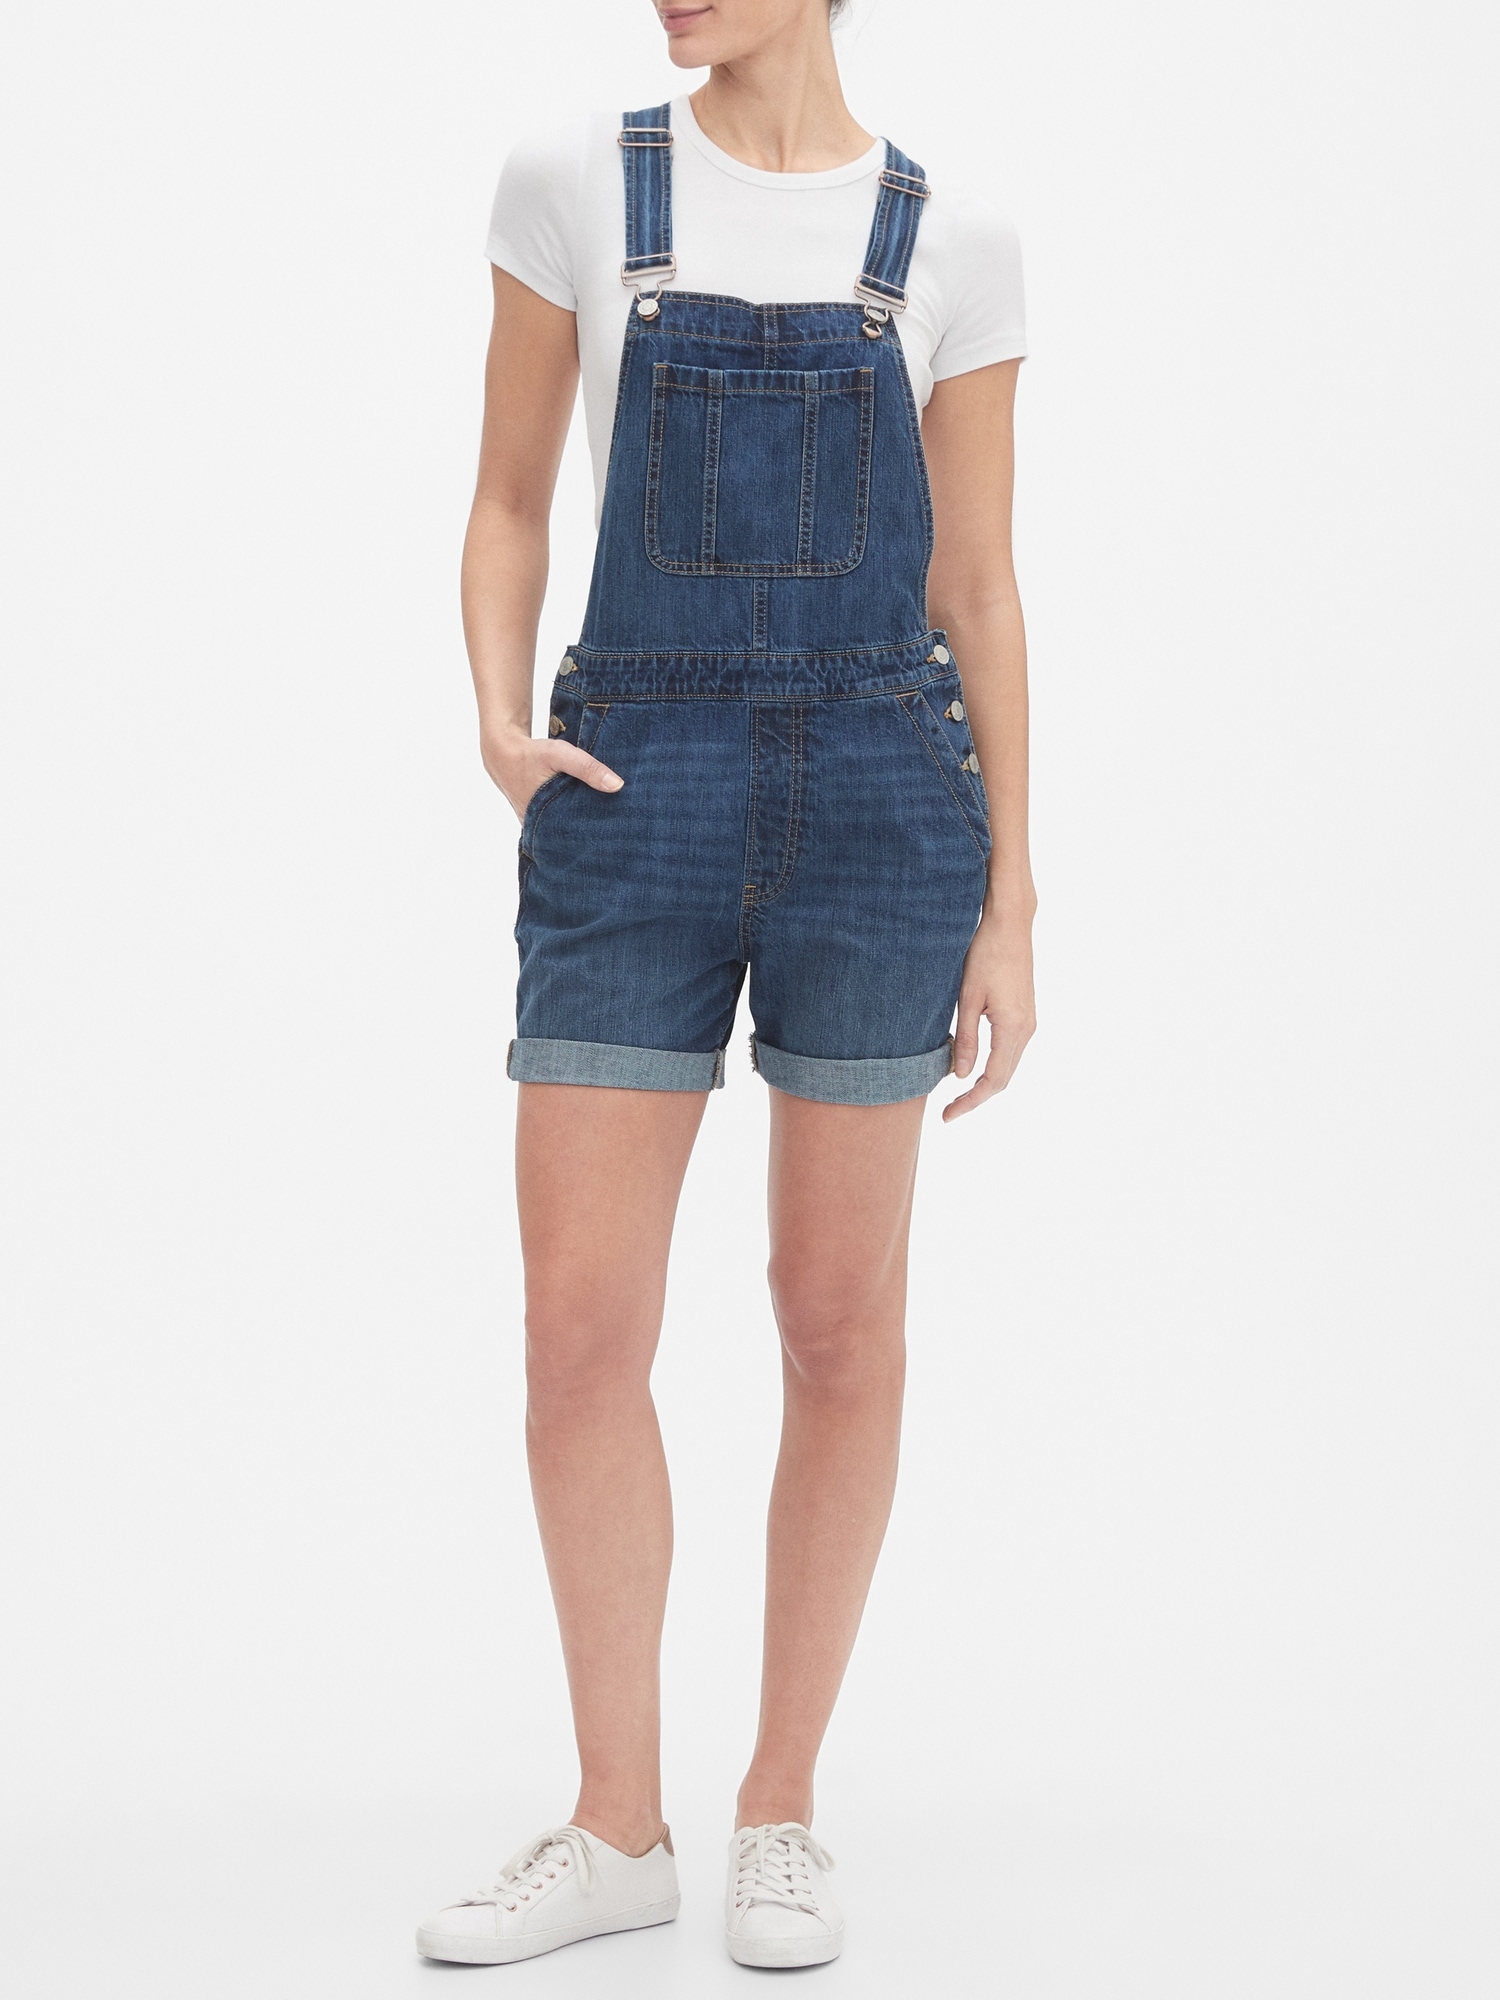 jeans overall shorts